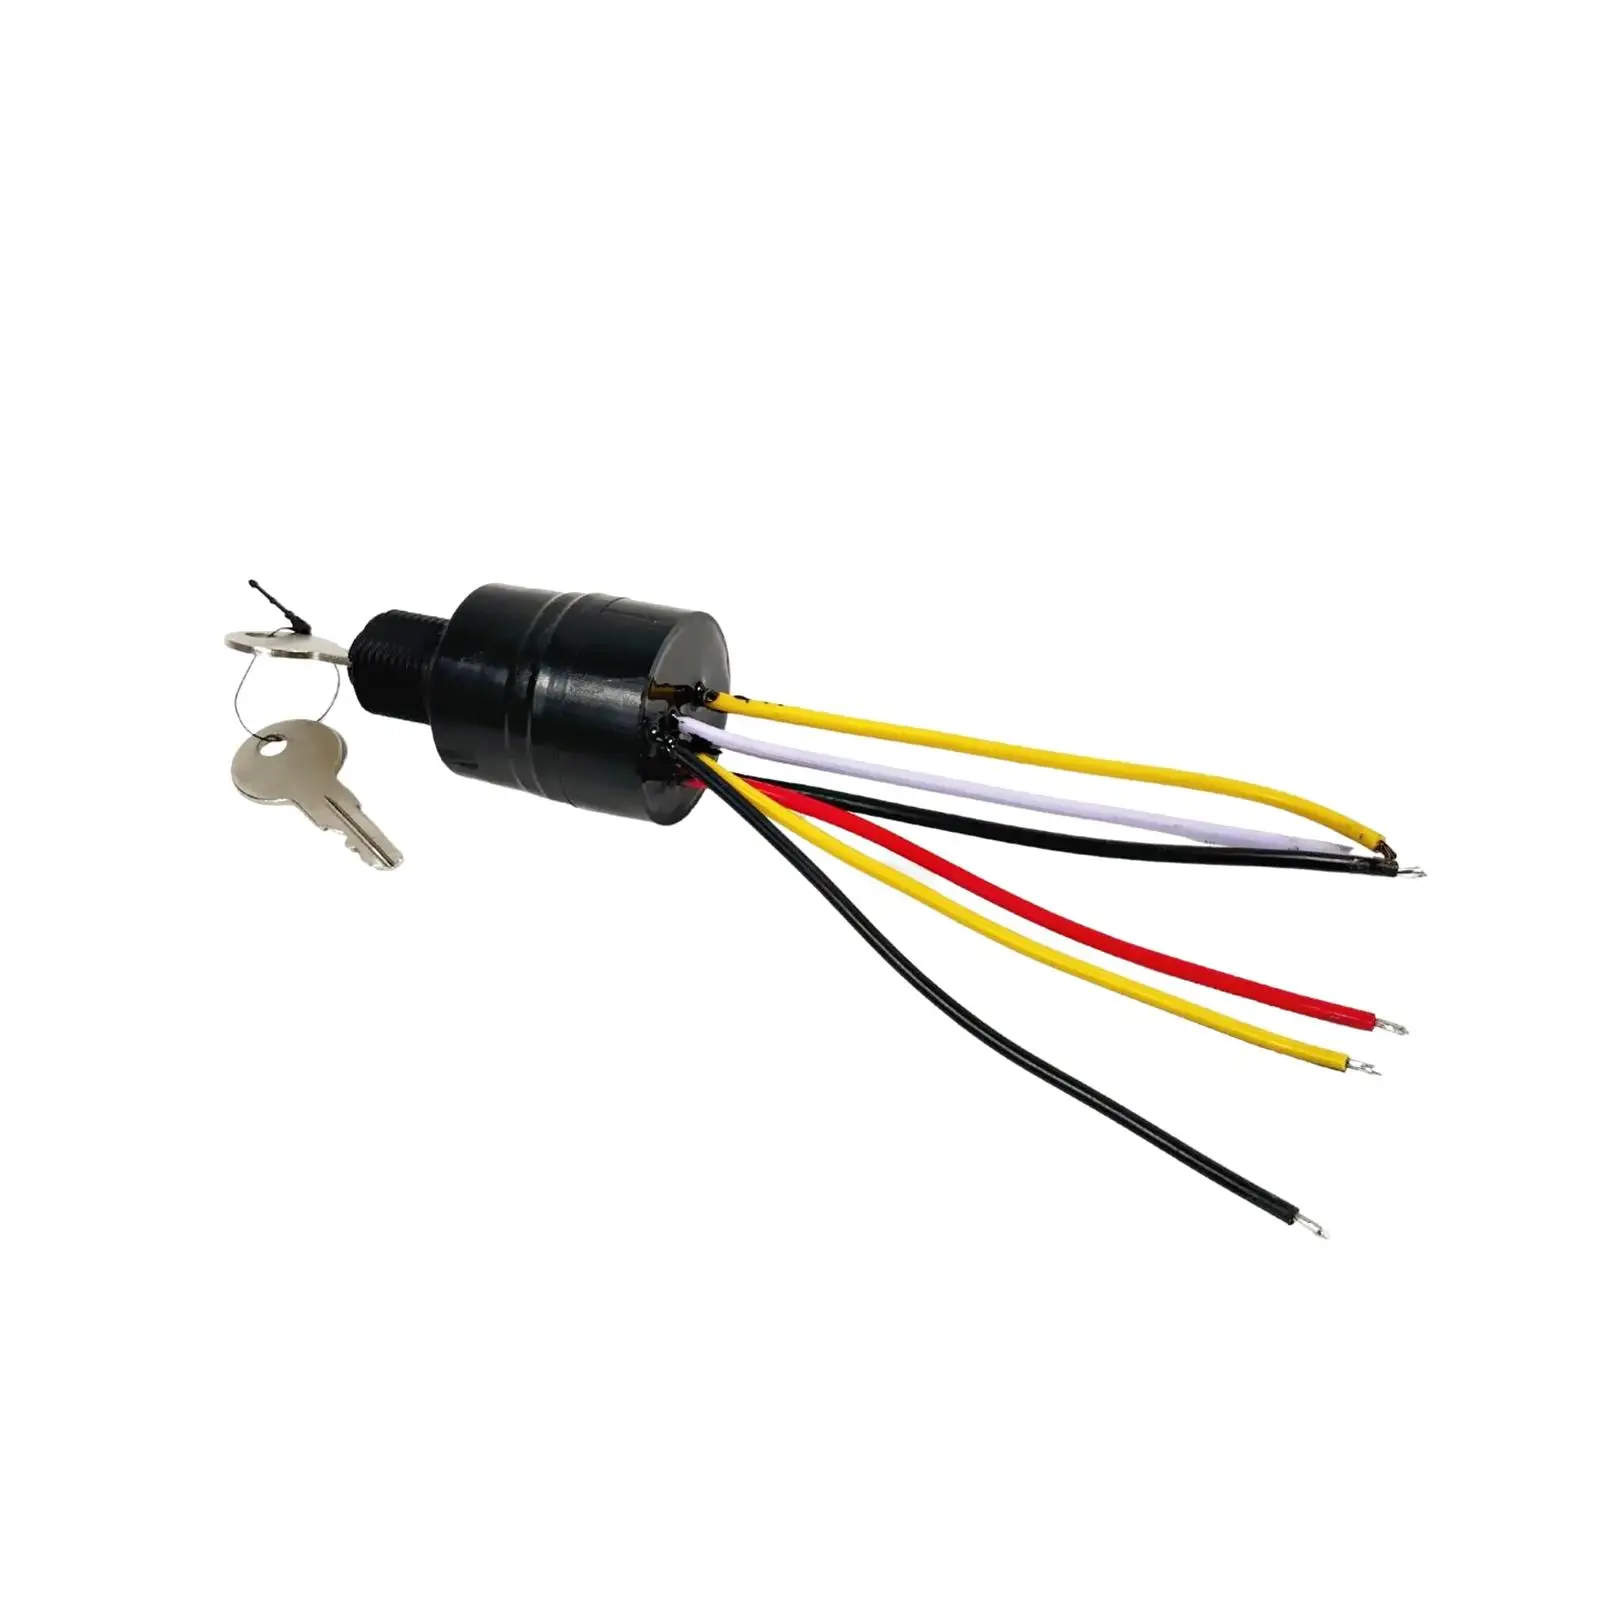 

Ignition Key Switch Boat Push to Choke 17009A2 6 Wire for Mercury Outboard Accessory Repair Part Sturdy Replacement